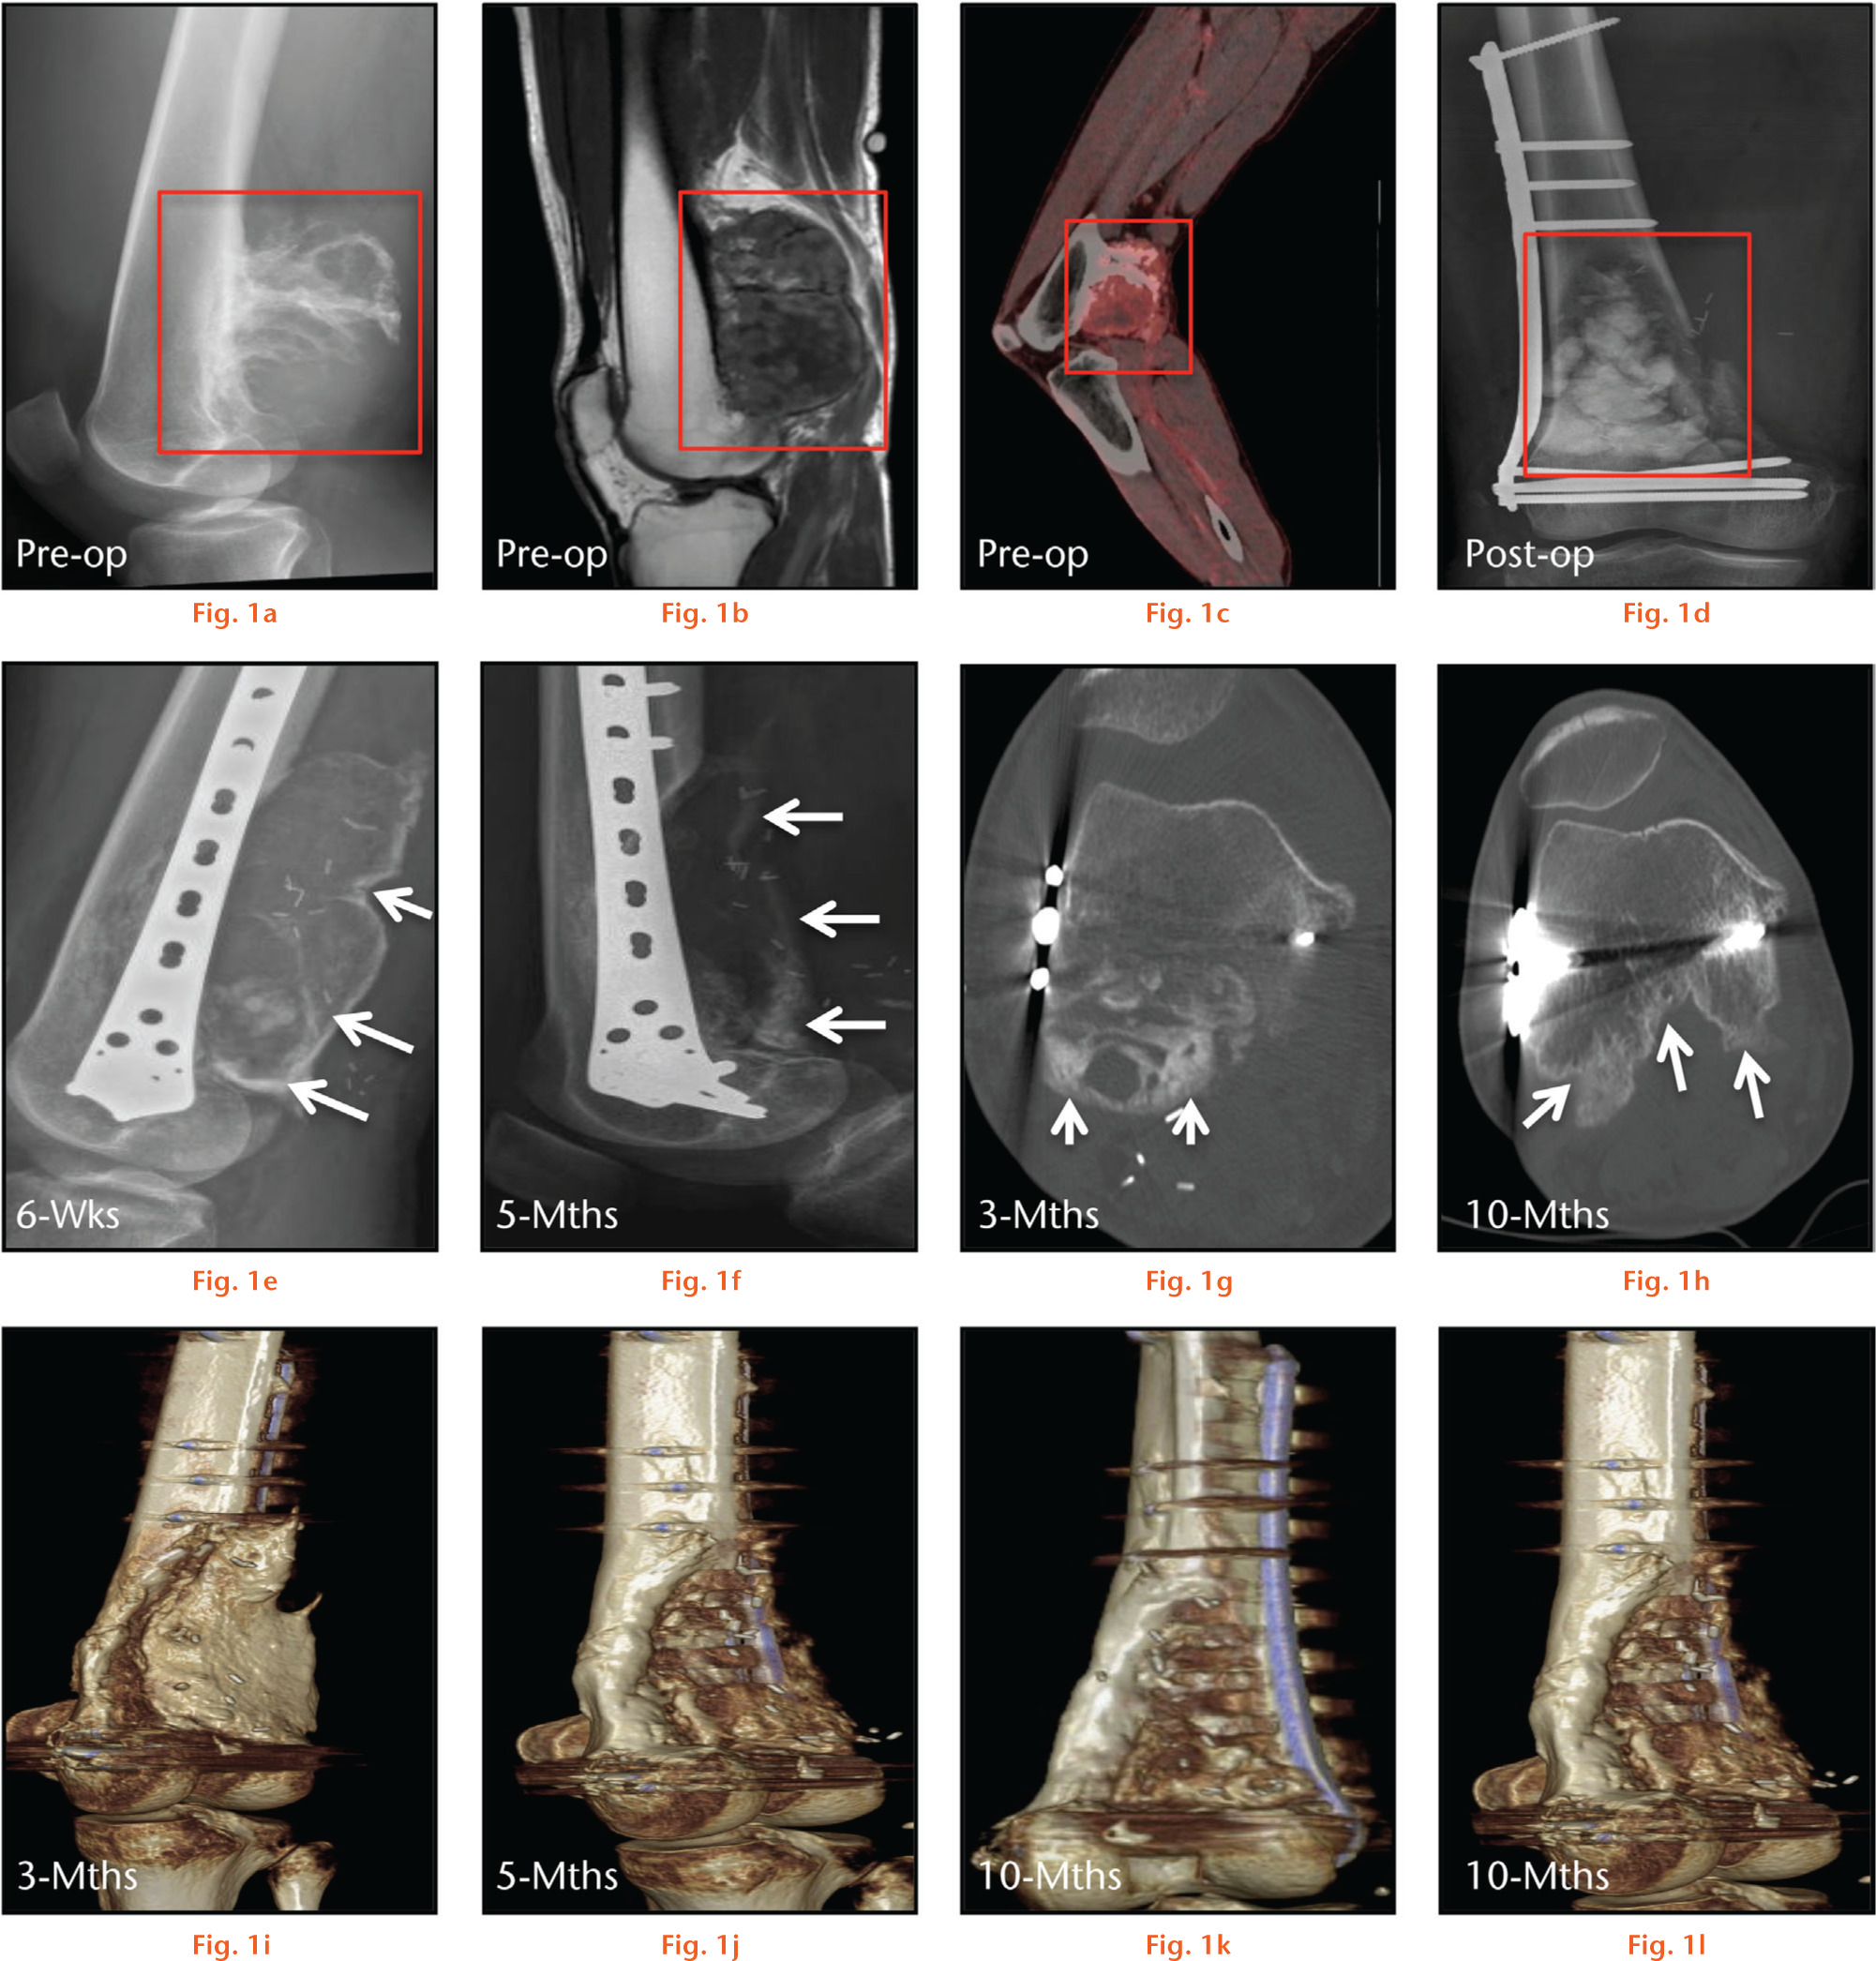  
            Time course observations of bone defect from a wide periosteal chondrosarcoma resection, treated with hydroxyapatite-calcium sulphate (HA-CS) and HA-CS-gentamicin (G) biomaterial. Panels (a), (b) and (c) represent pre-operative radiograph, MRI and PET-CT images of the tumour (red box), while panel (d) shows the bone defect filled with the biomaterial (red box) post-operatively. Arrows in the radiographs in panel (e) indicate bone formation in areas of direct muscle contact with HA-CS and HA-CS-G six weeks post-operatively, while arrows in panel (f) indicate reduced opacity of the regenerate at five months. Arrows in CT images in panels (g) and (h), respectively, indicate bone formation in the treated area posterior to the distal supracondylar region at three months post-operatively, progressively remodeling at ten months. Panels (i) through to (l) represent 3D reconstructions of CT images at three (i), five (j) and ten months (k), (l) showing progressive bone remodeling around the defect.
          